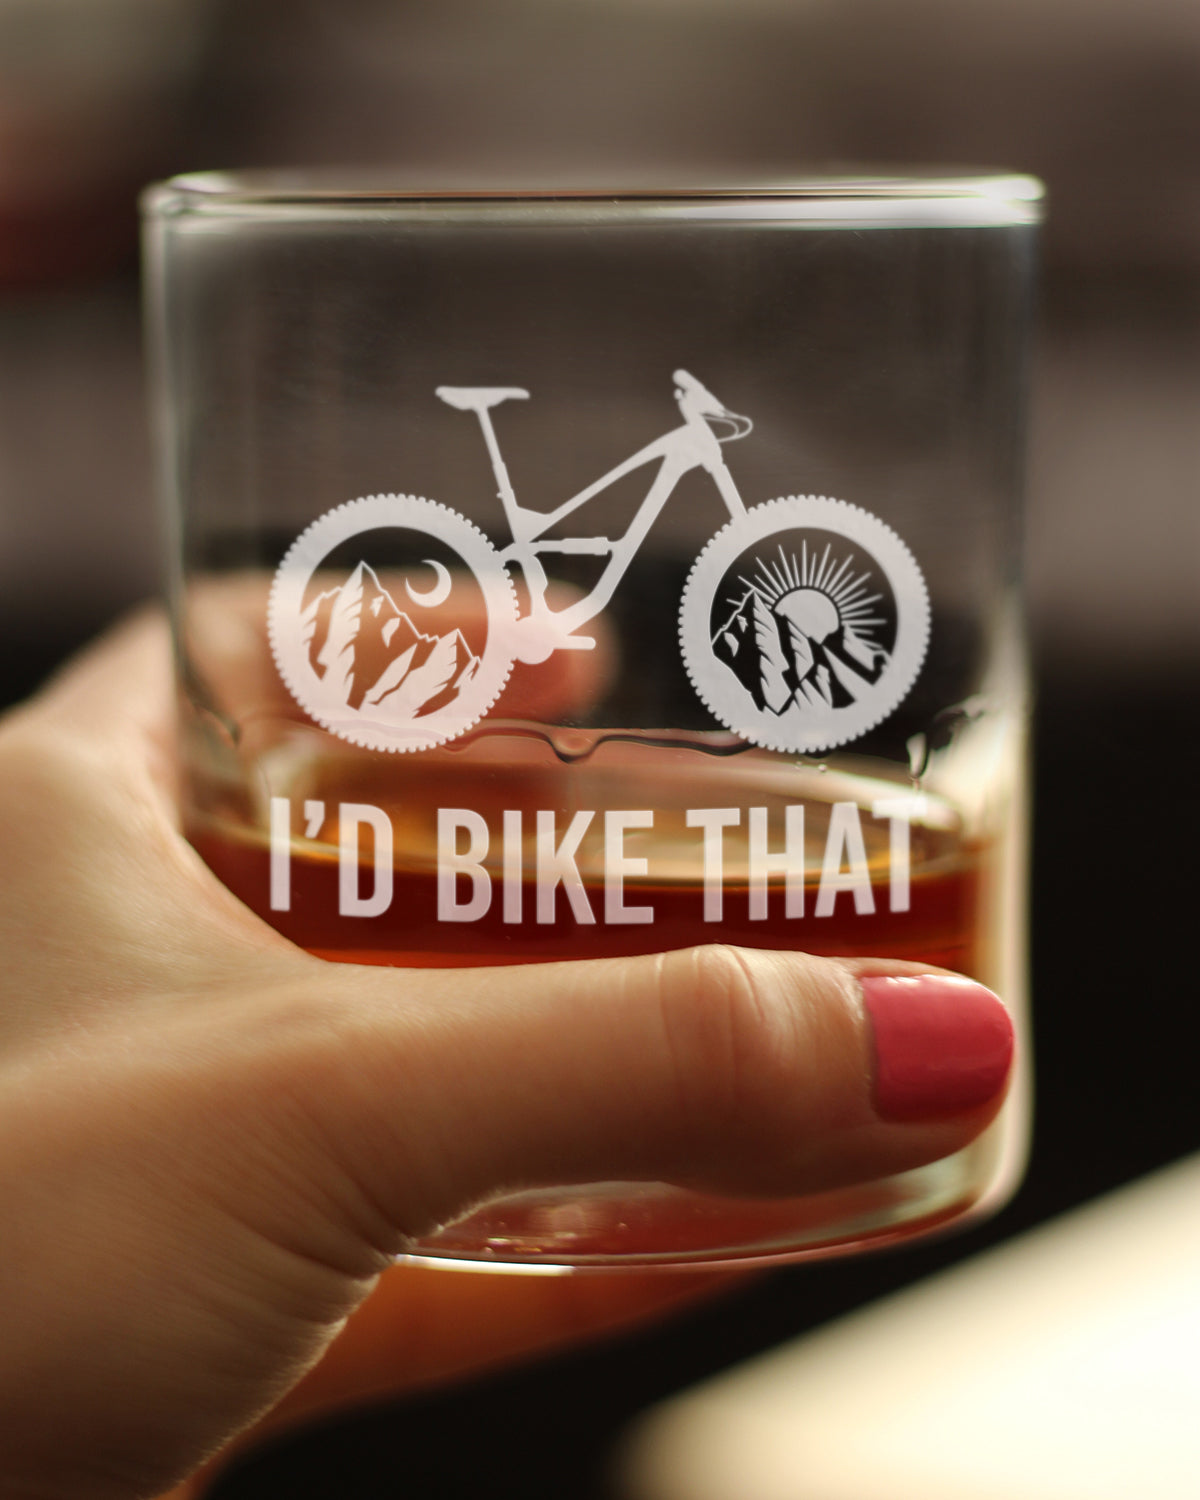 I&#39;d Bike That - Whiskey Rocks Glass - Cool Bicycle Themed Decor and Gifts for Outdoor Lovers - 10.25 Oz Glasses